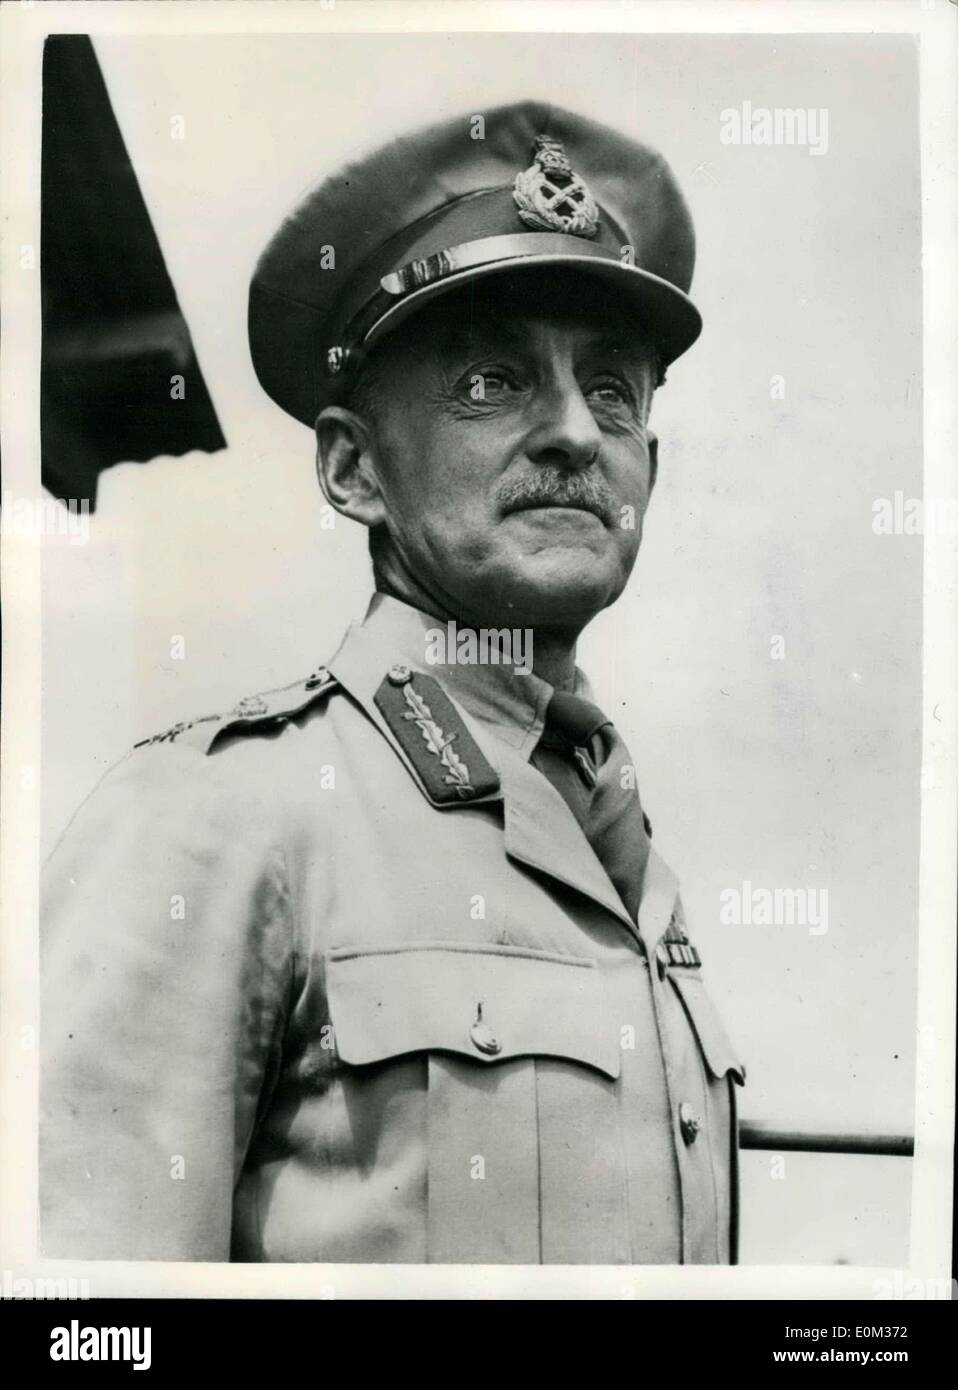 Apr. 24, 1953 - Major General Sir Robert Hinde - Newly Directed Director Of Operations Against The Mau Mau. Photo shows Portrait of Major General Sir Robert Hinde the newly appointed Director of Operations in Kenya - the new ''over all' commander of the battles against the droaded Mau Mau. Stock Photo